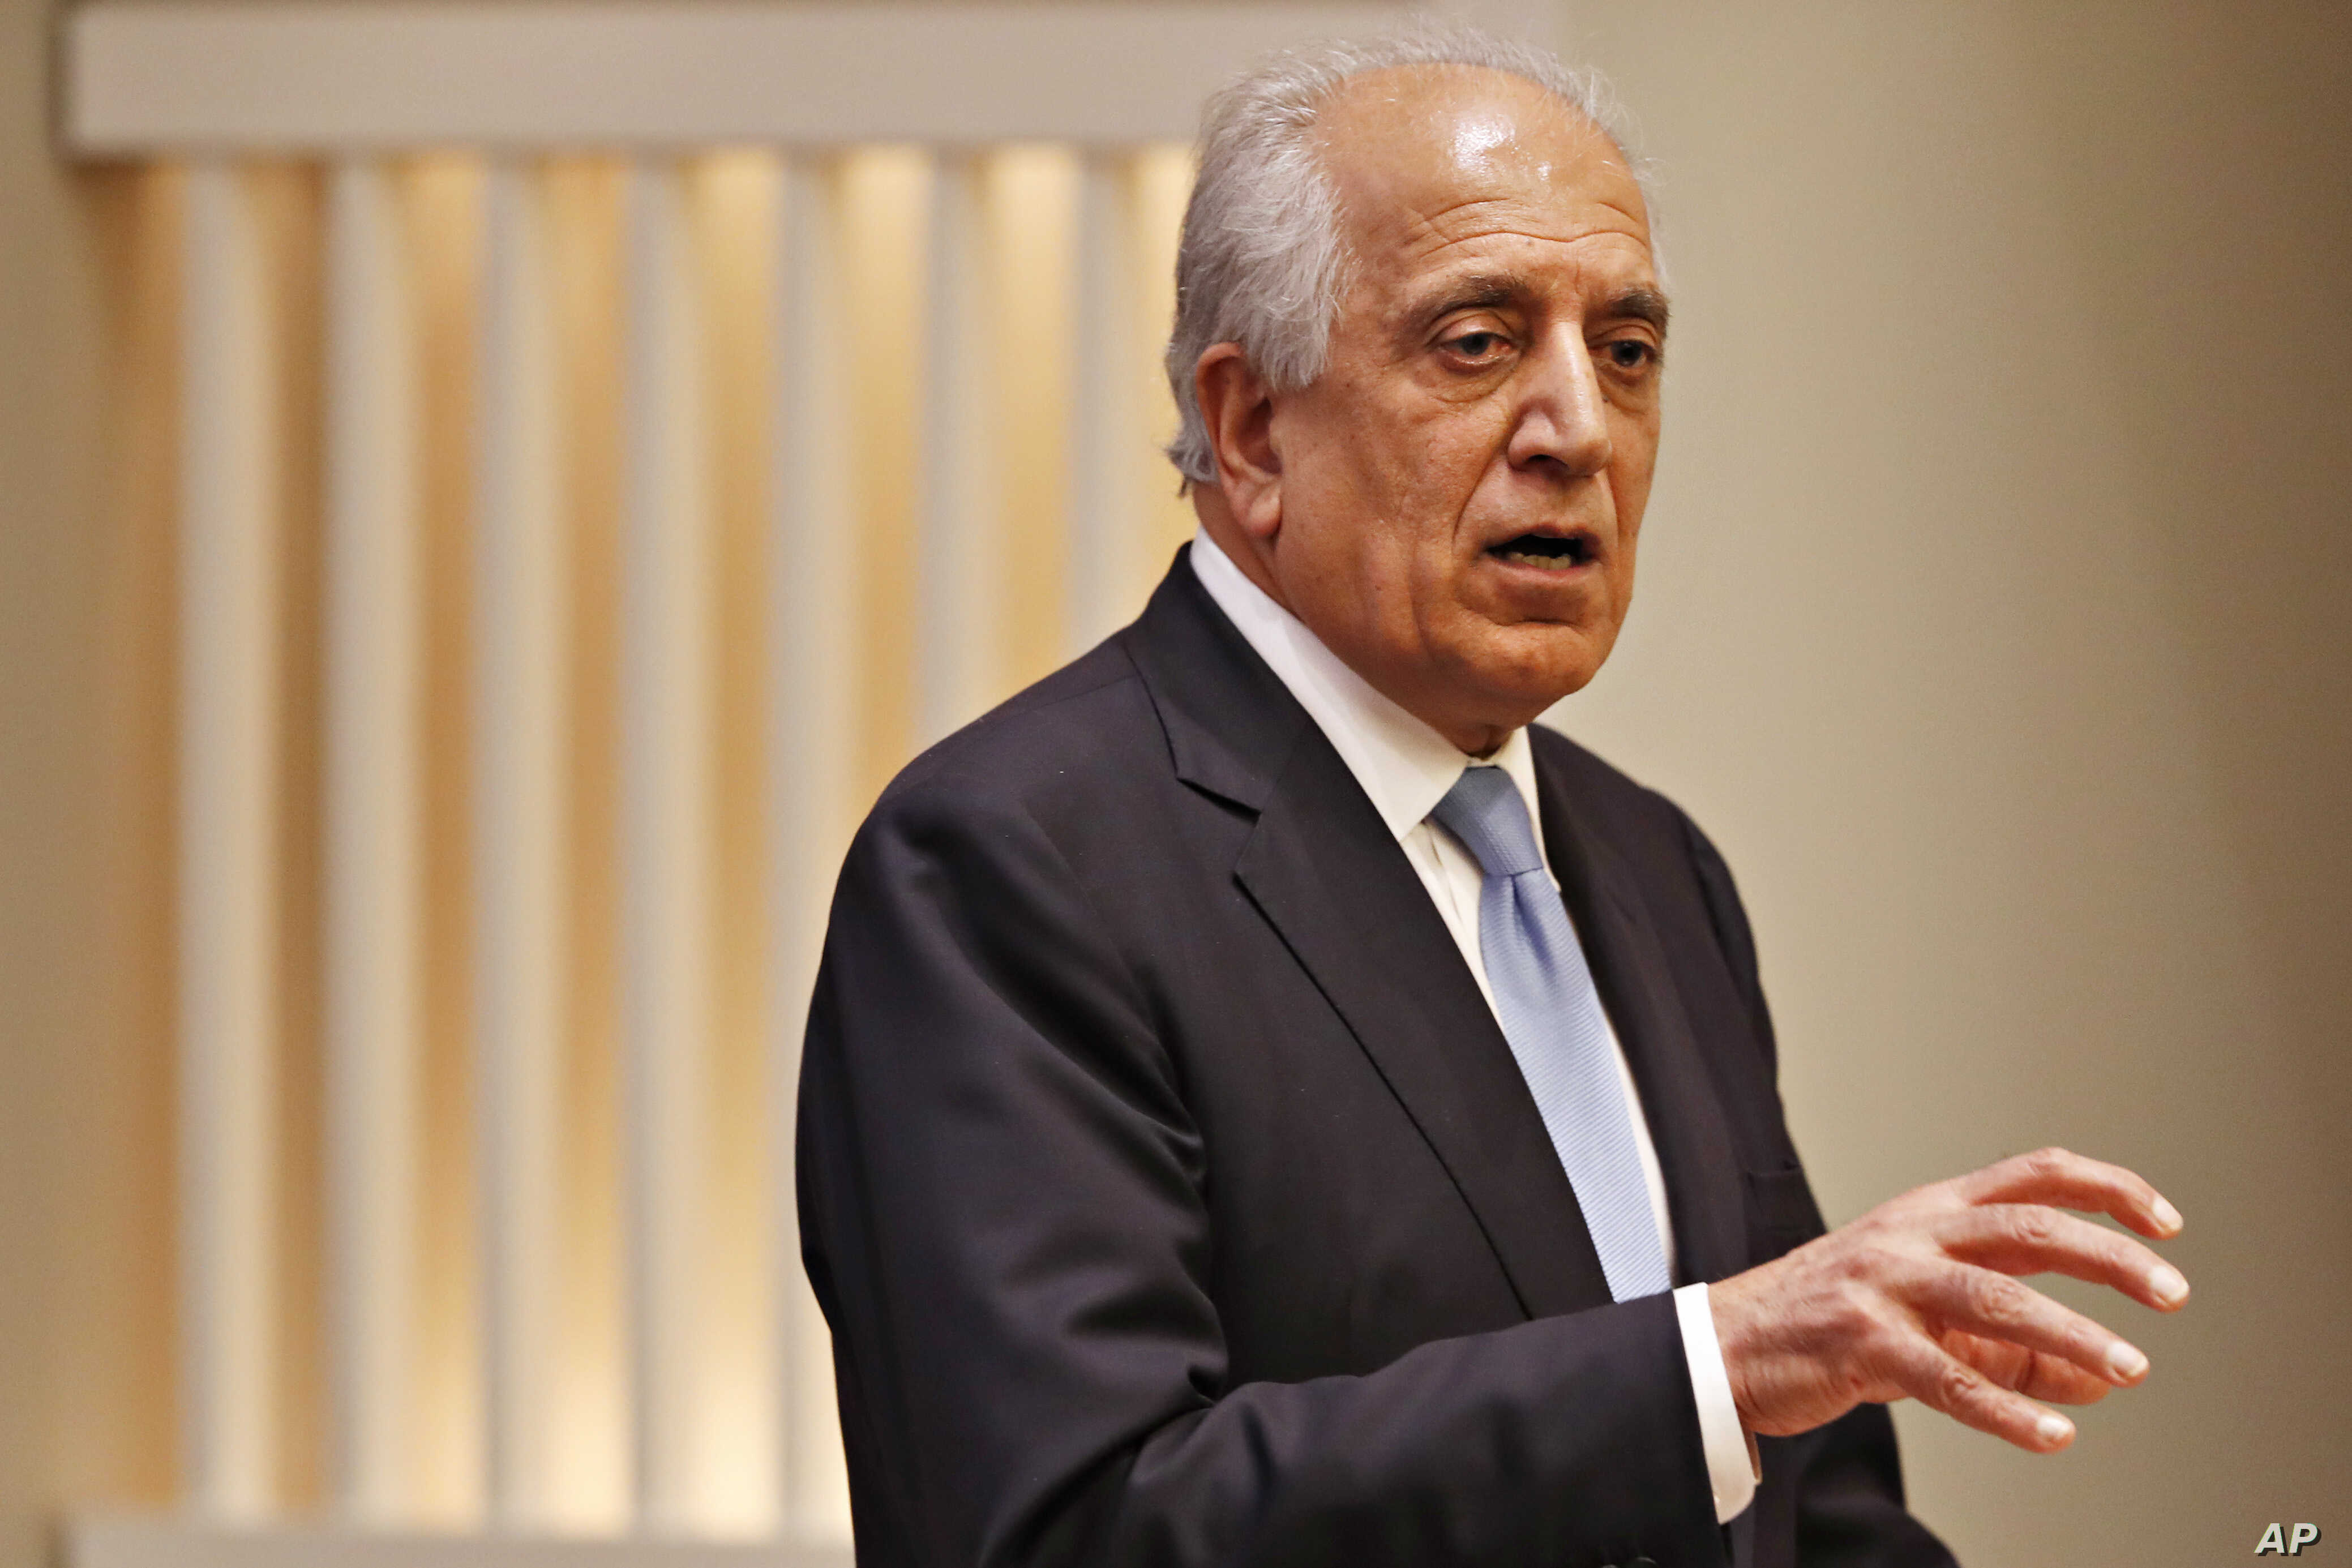 Special Representative for Afghanistan Reconciliation Zalmay Khalilzad speaks on the prospects for peace, Friday, Feb. 8, 2019, at the U.S. Institute of Peace, in Washington. (AP Photo/Jacquelyn Martin)